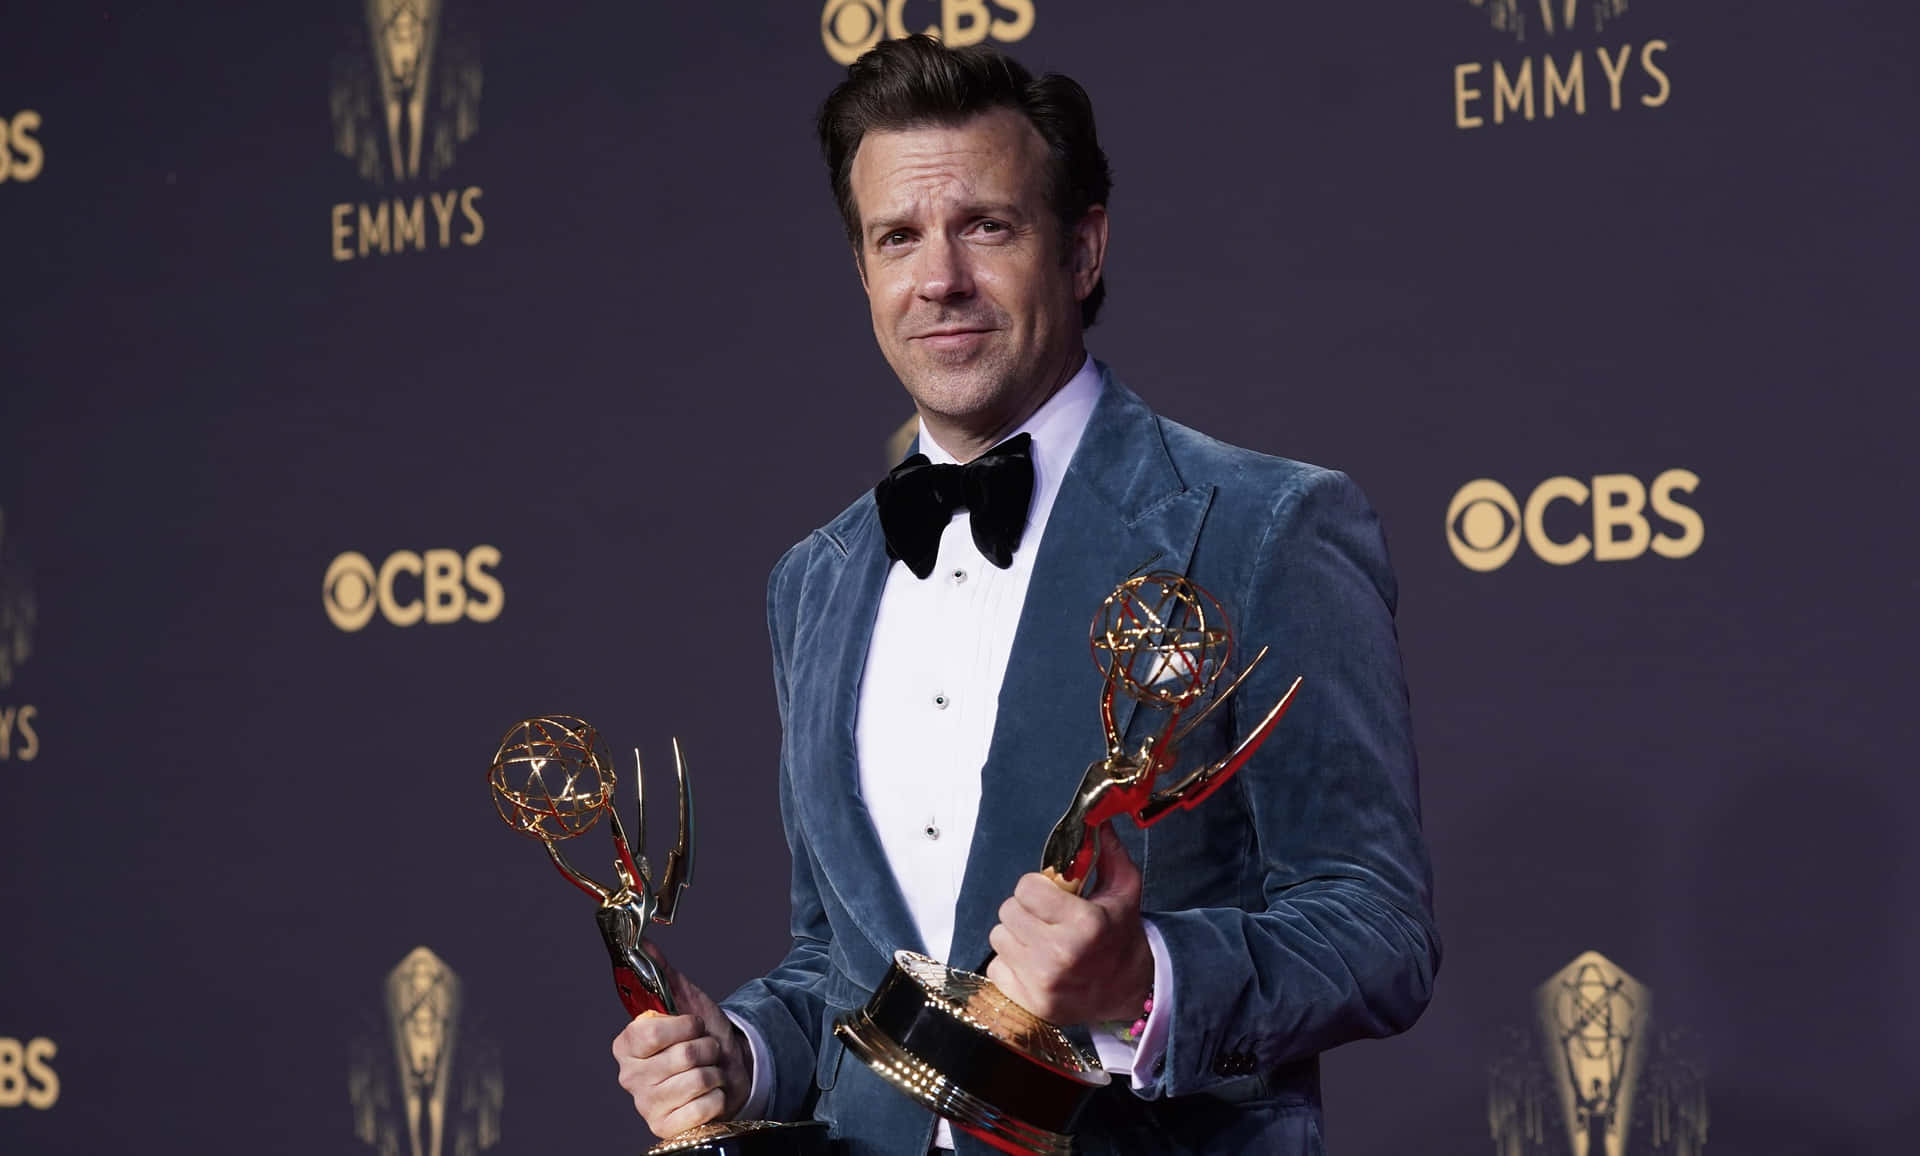 Jasonsudeikis Is Not A Phrase Related To Computer Or Mobile Wallpaper. It Is The Name Of An Actor. If You Would Like Translations Related To Computer Or Mobile Wallpaper, Please Provide Specific Phrases Or Sentences. Fondo de pantalla